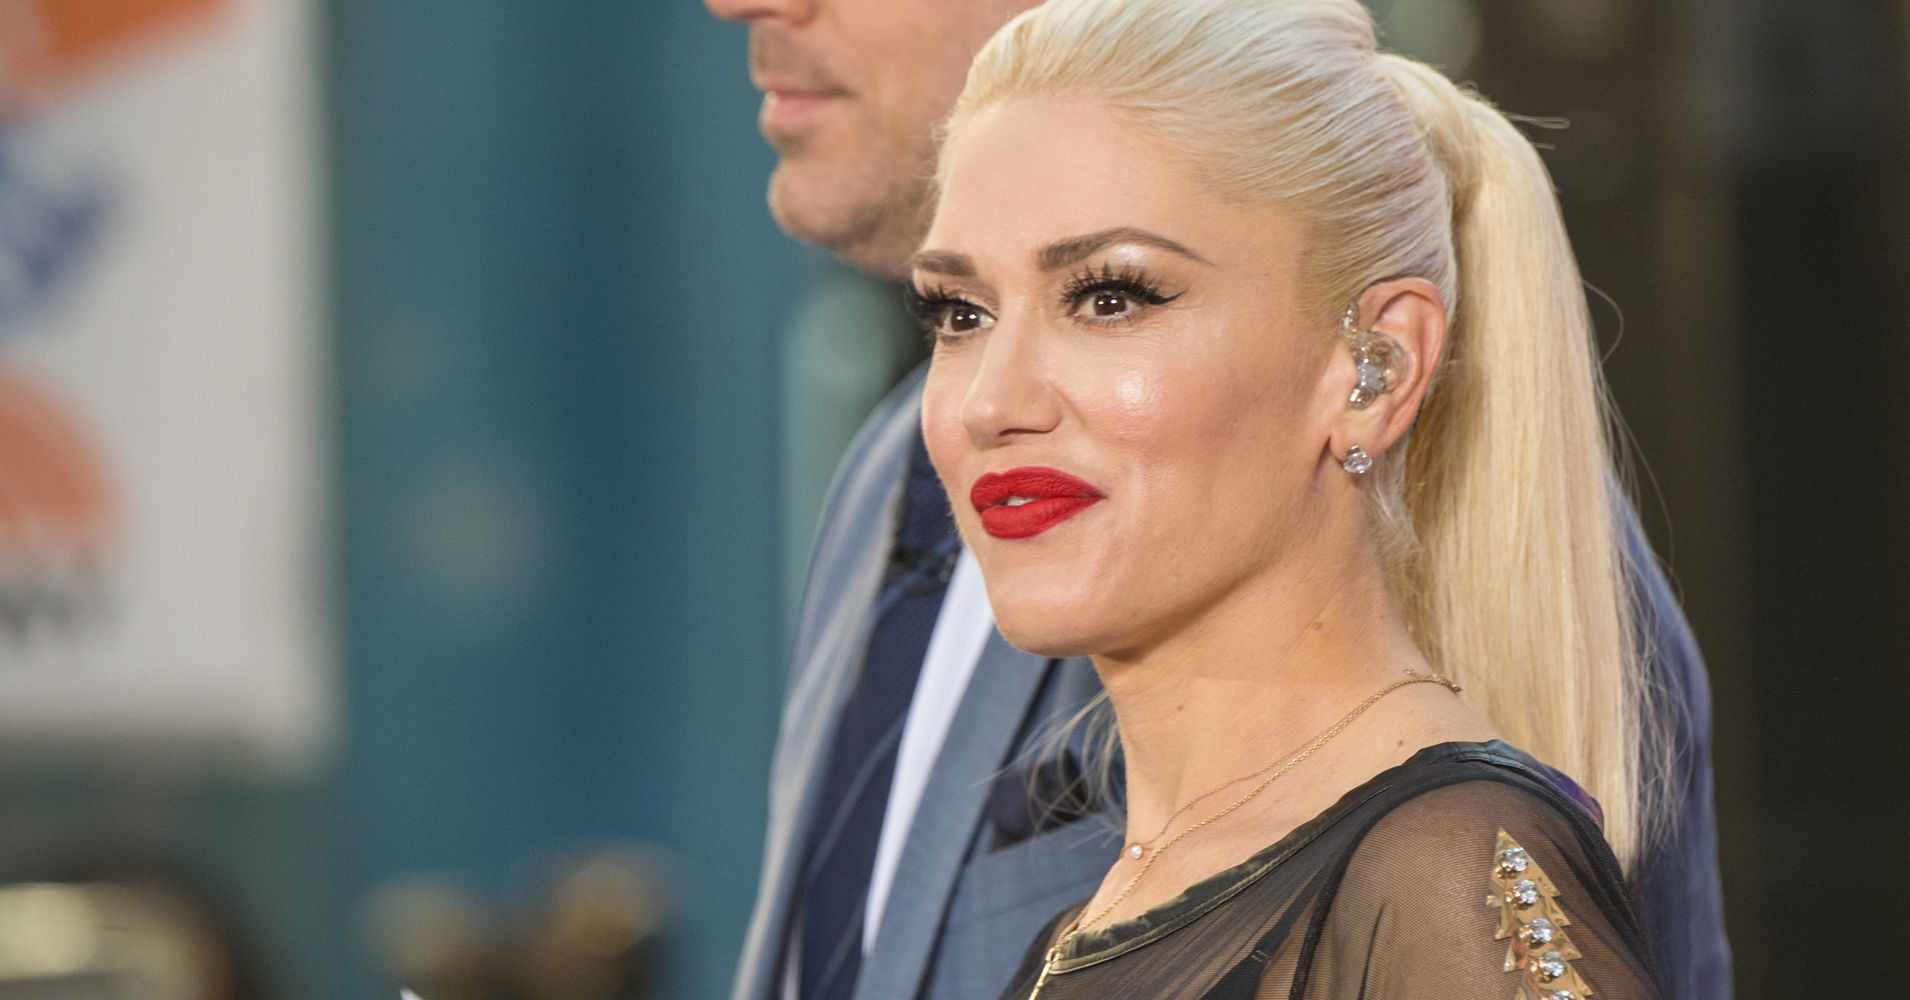 Gwen Stefani Gets Teary Eyed While Chatting About Her Love Life